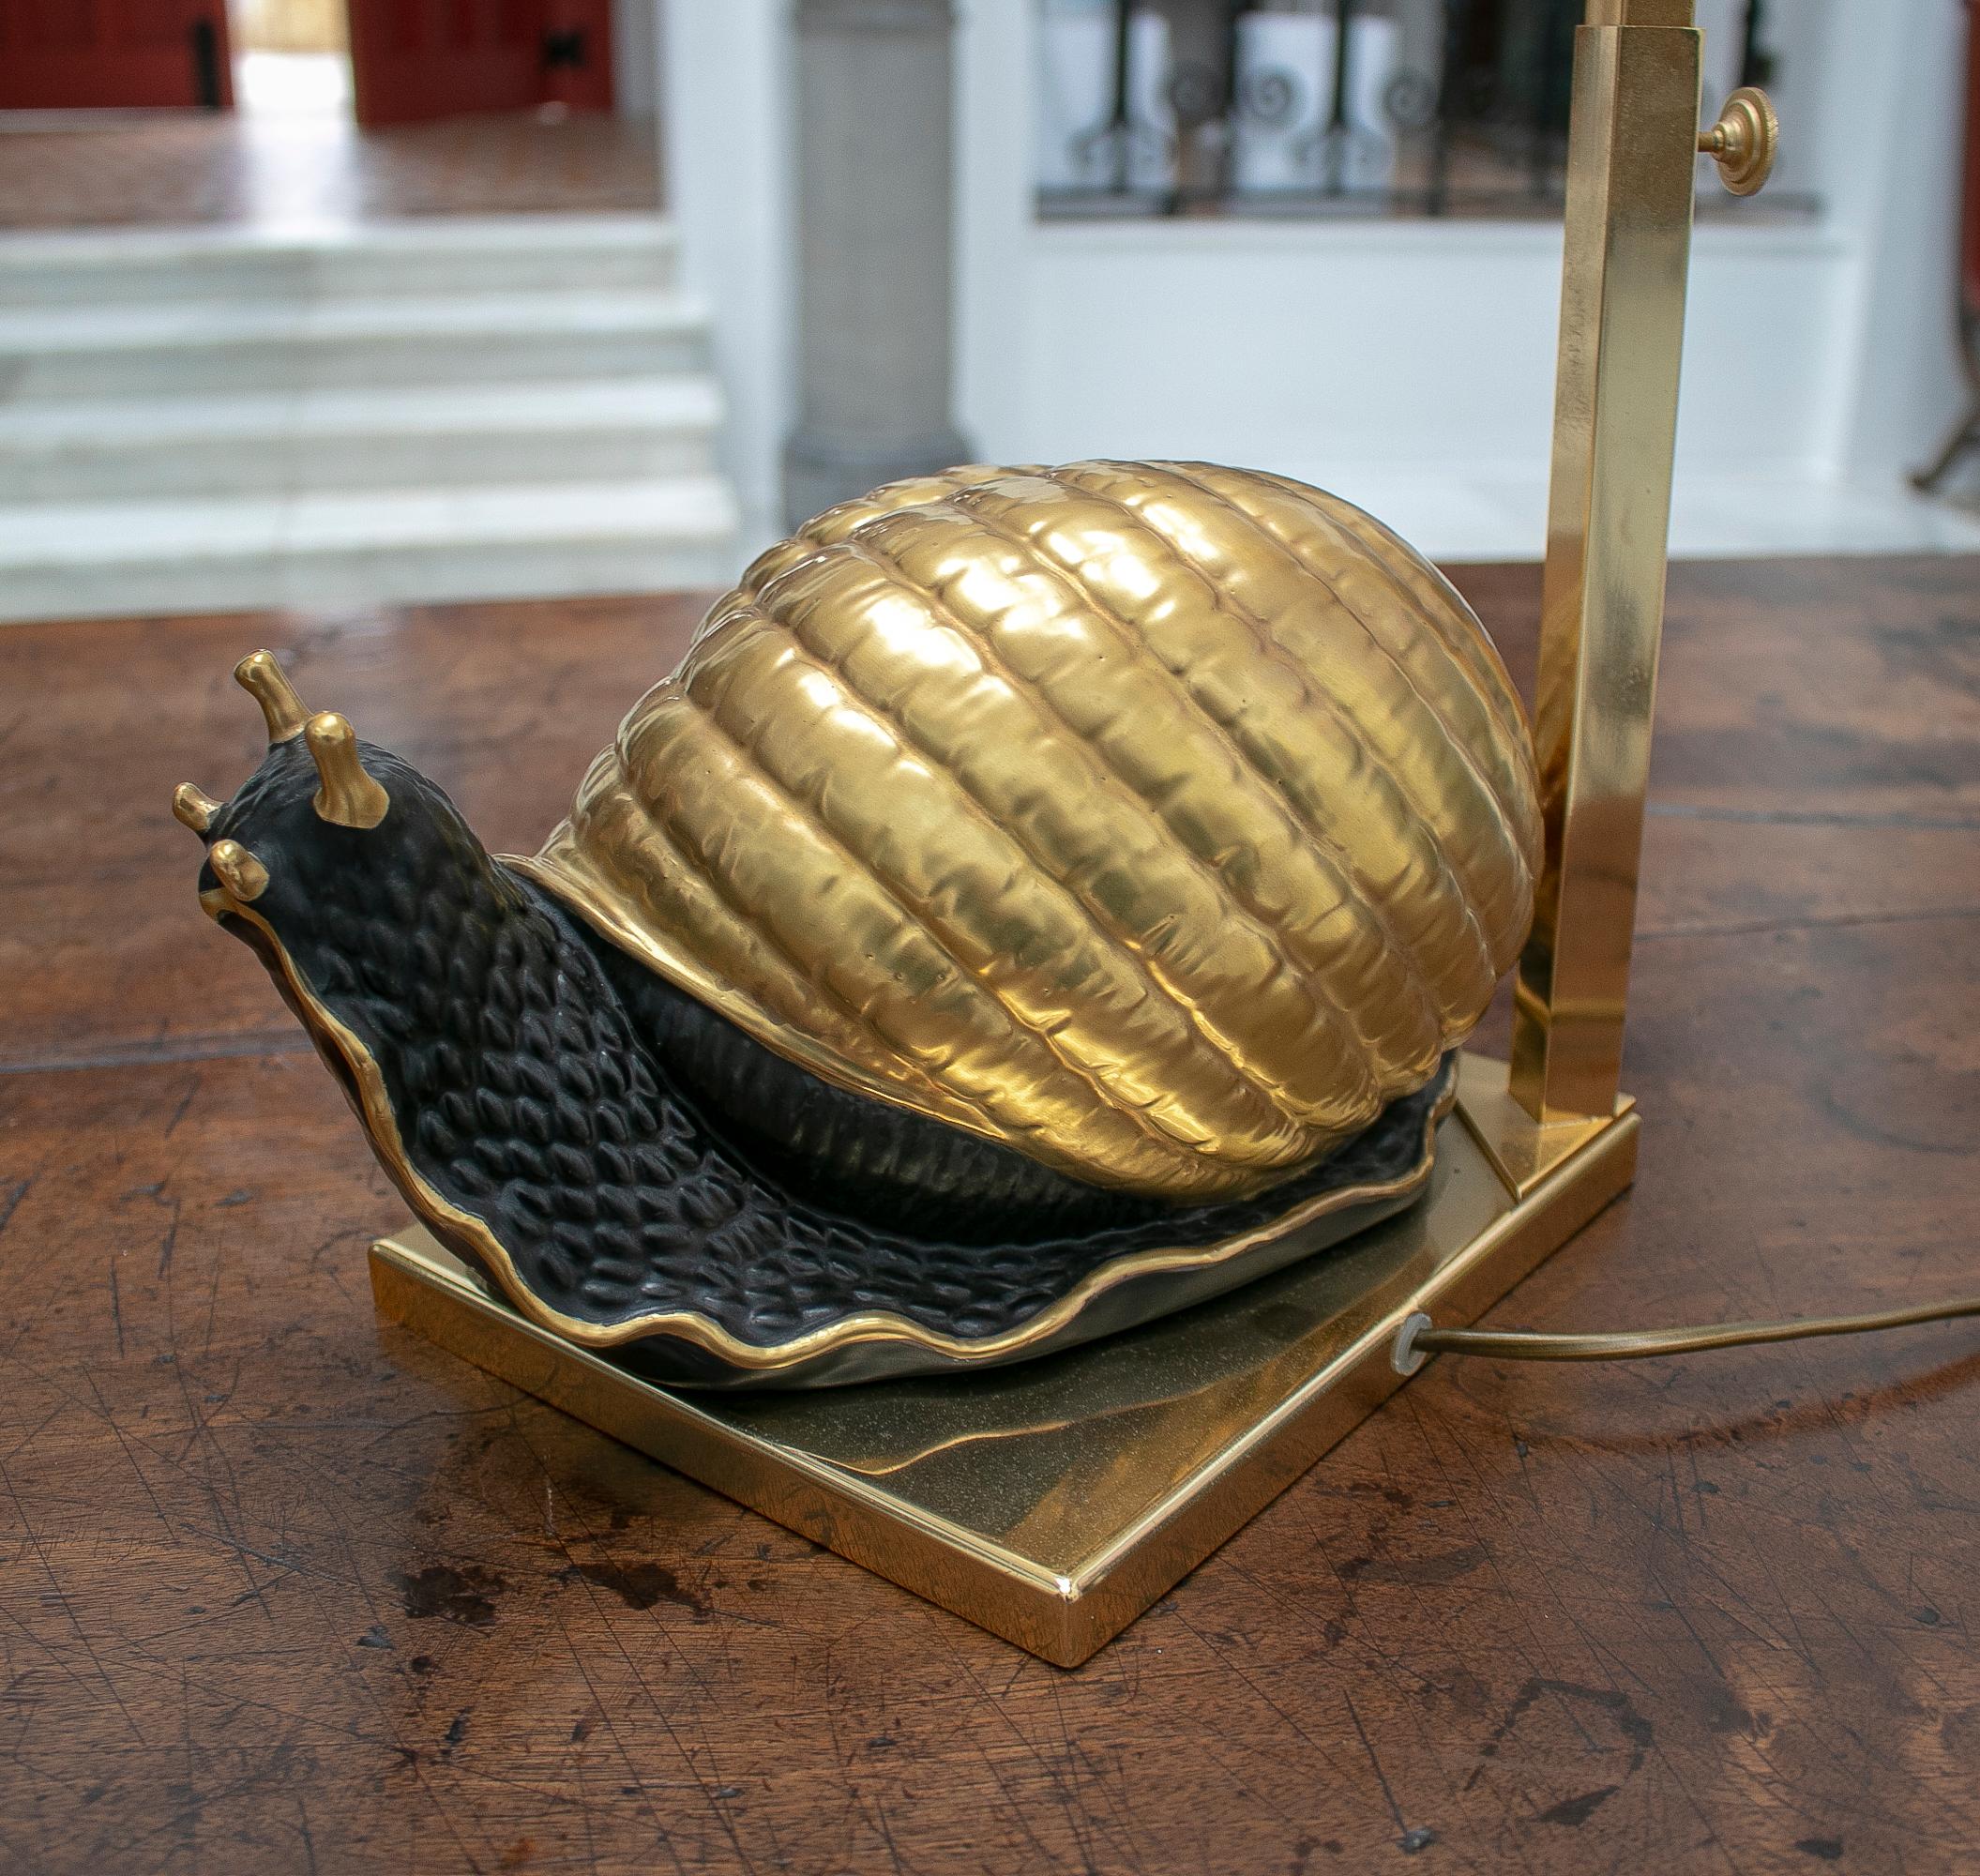 1950s European Snail Shaped Terracotta Lamp with Bronze Base and Shade In Good Condition For Sale In Marbella, ES